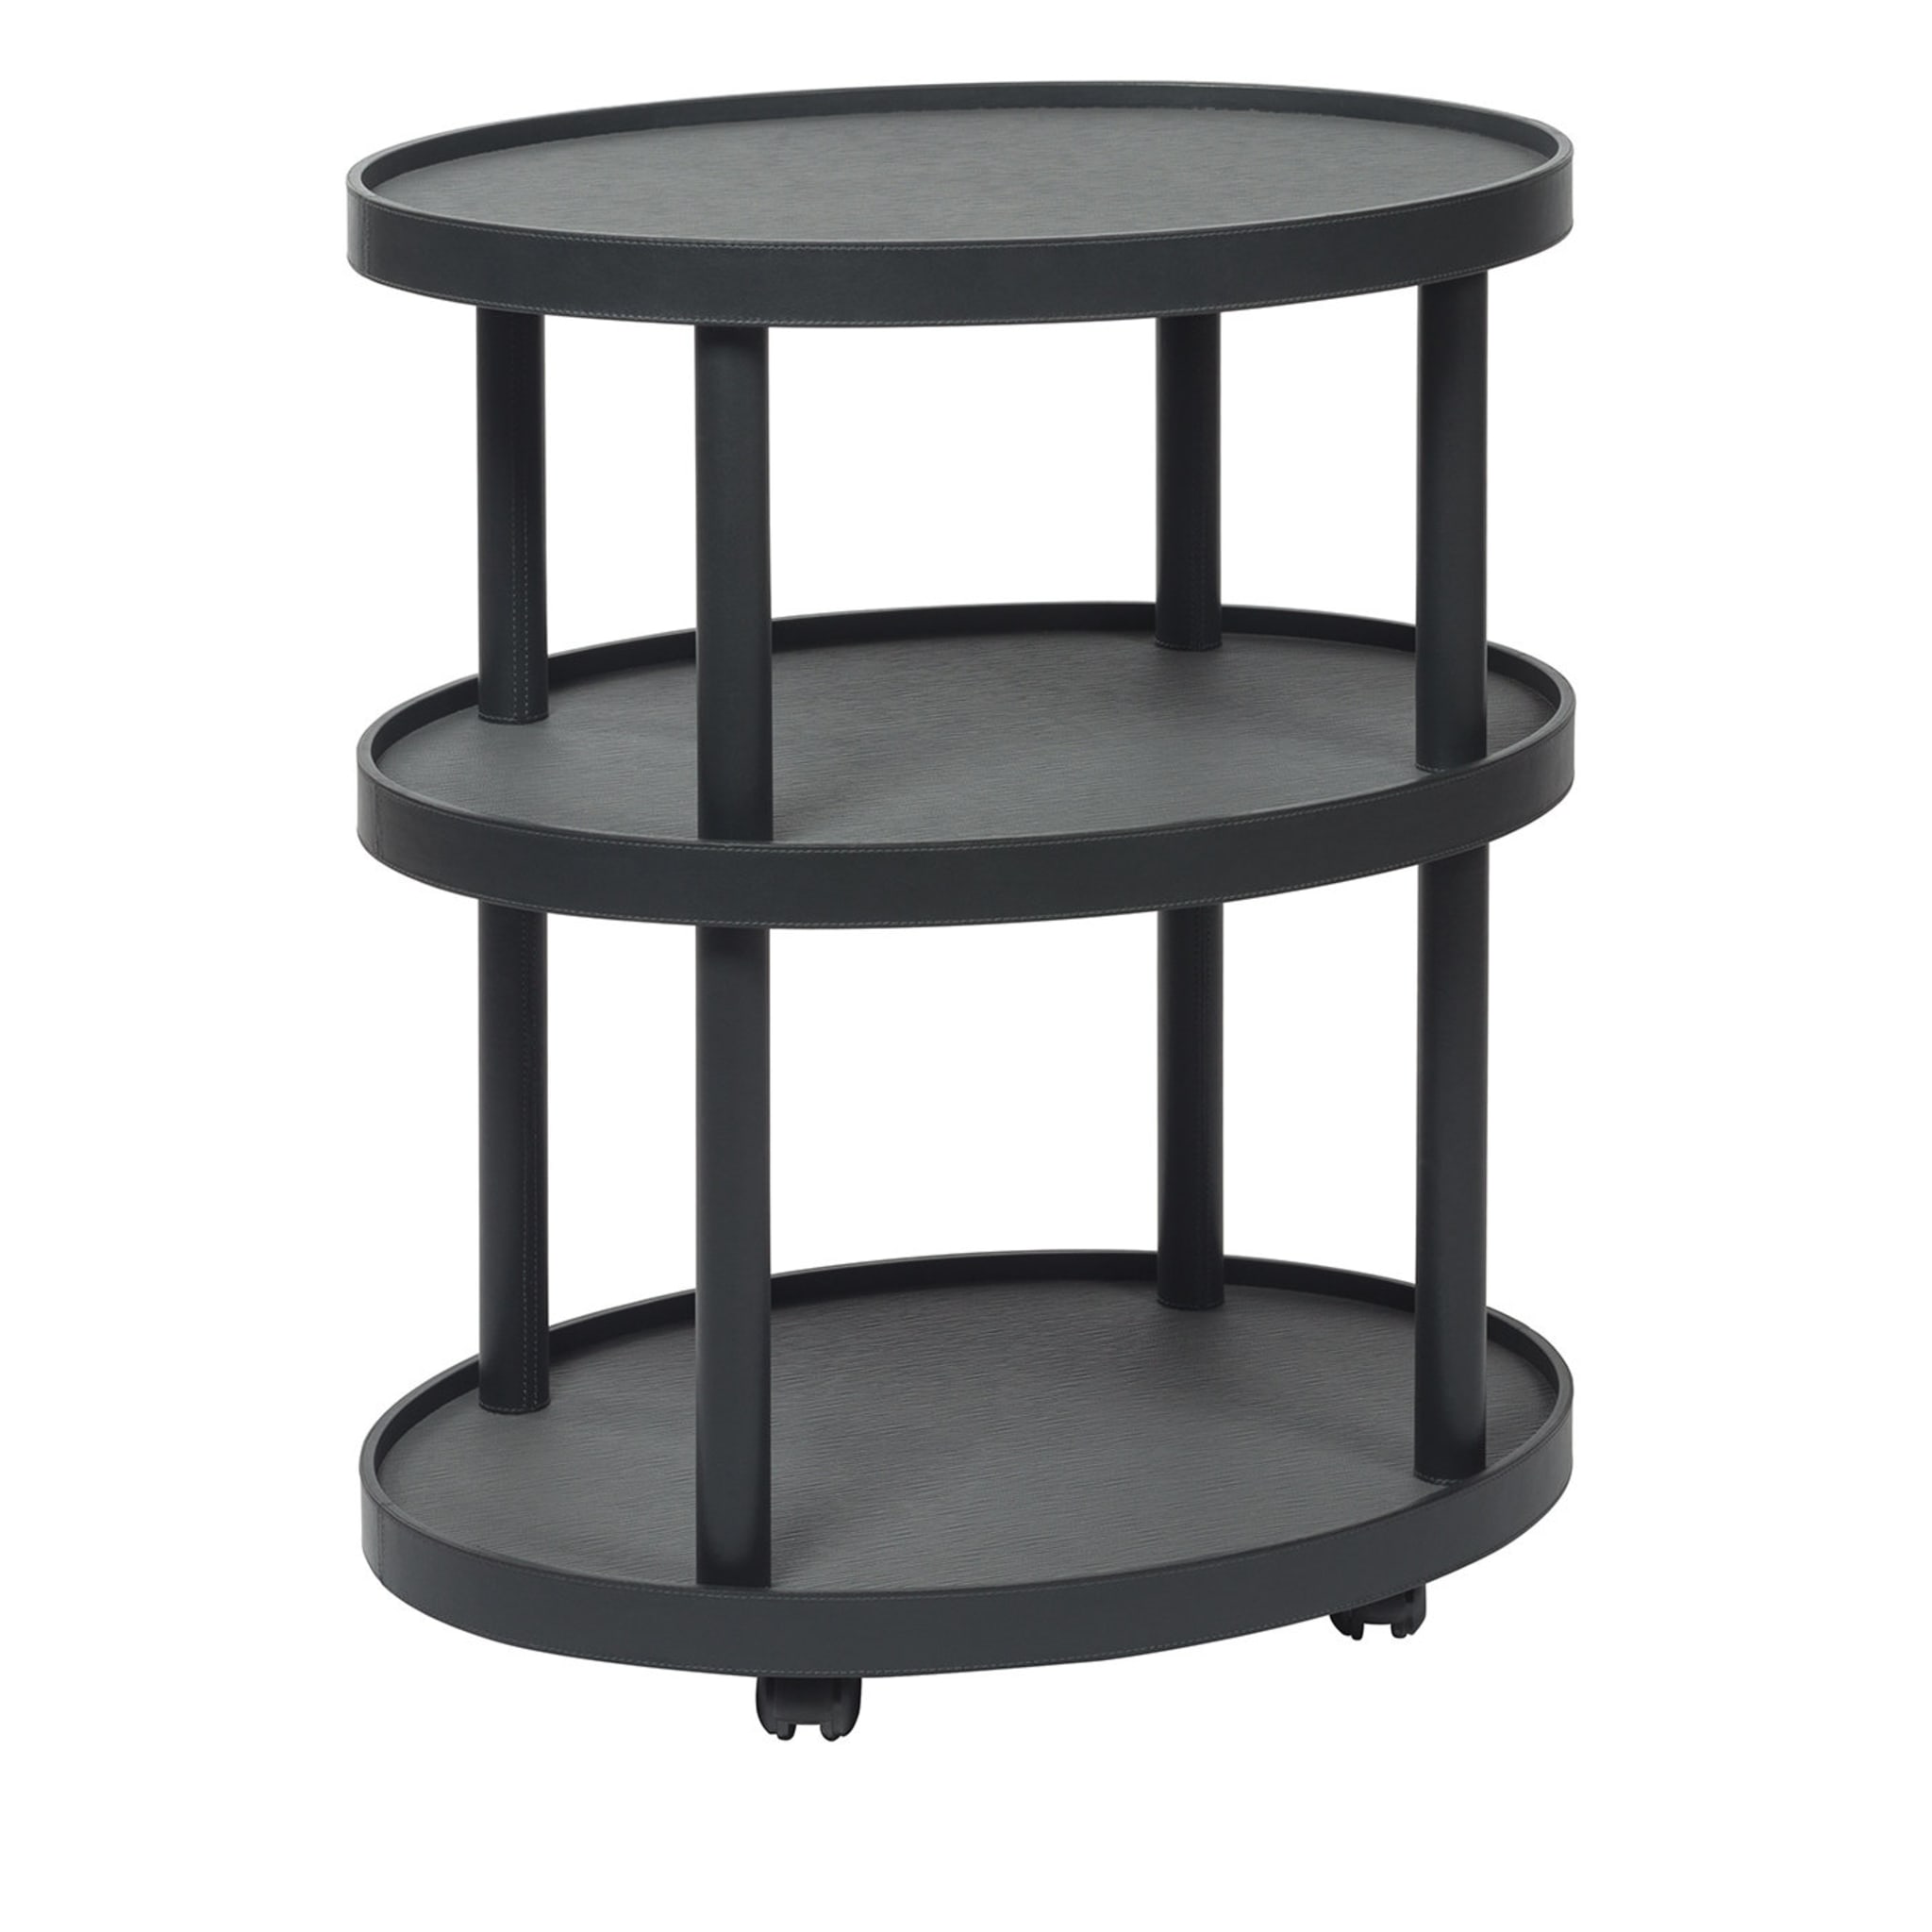 Polo Trolley 3-Tier Black Oval Table - Main view